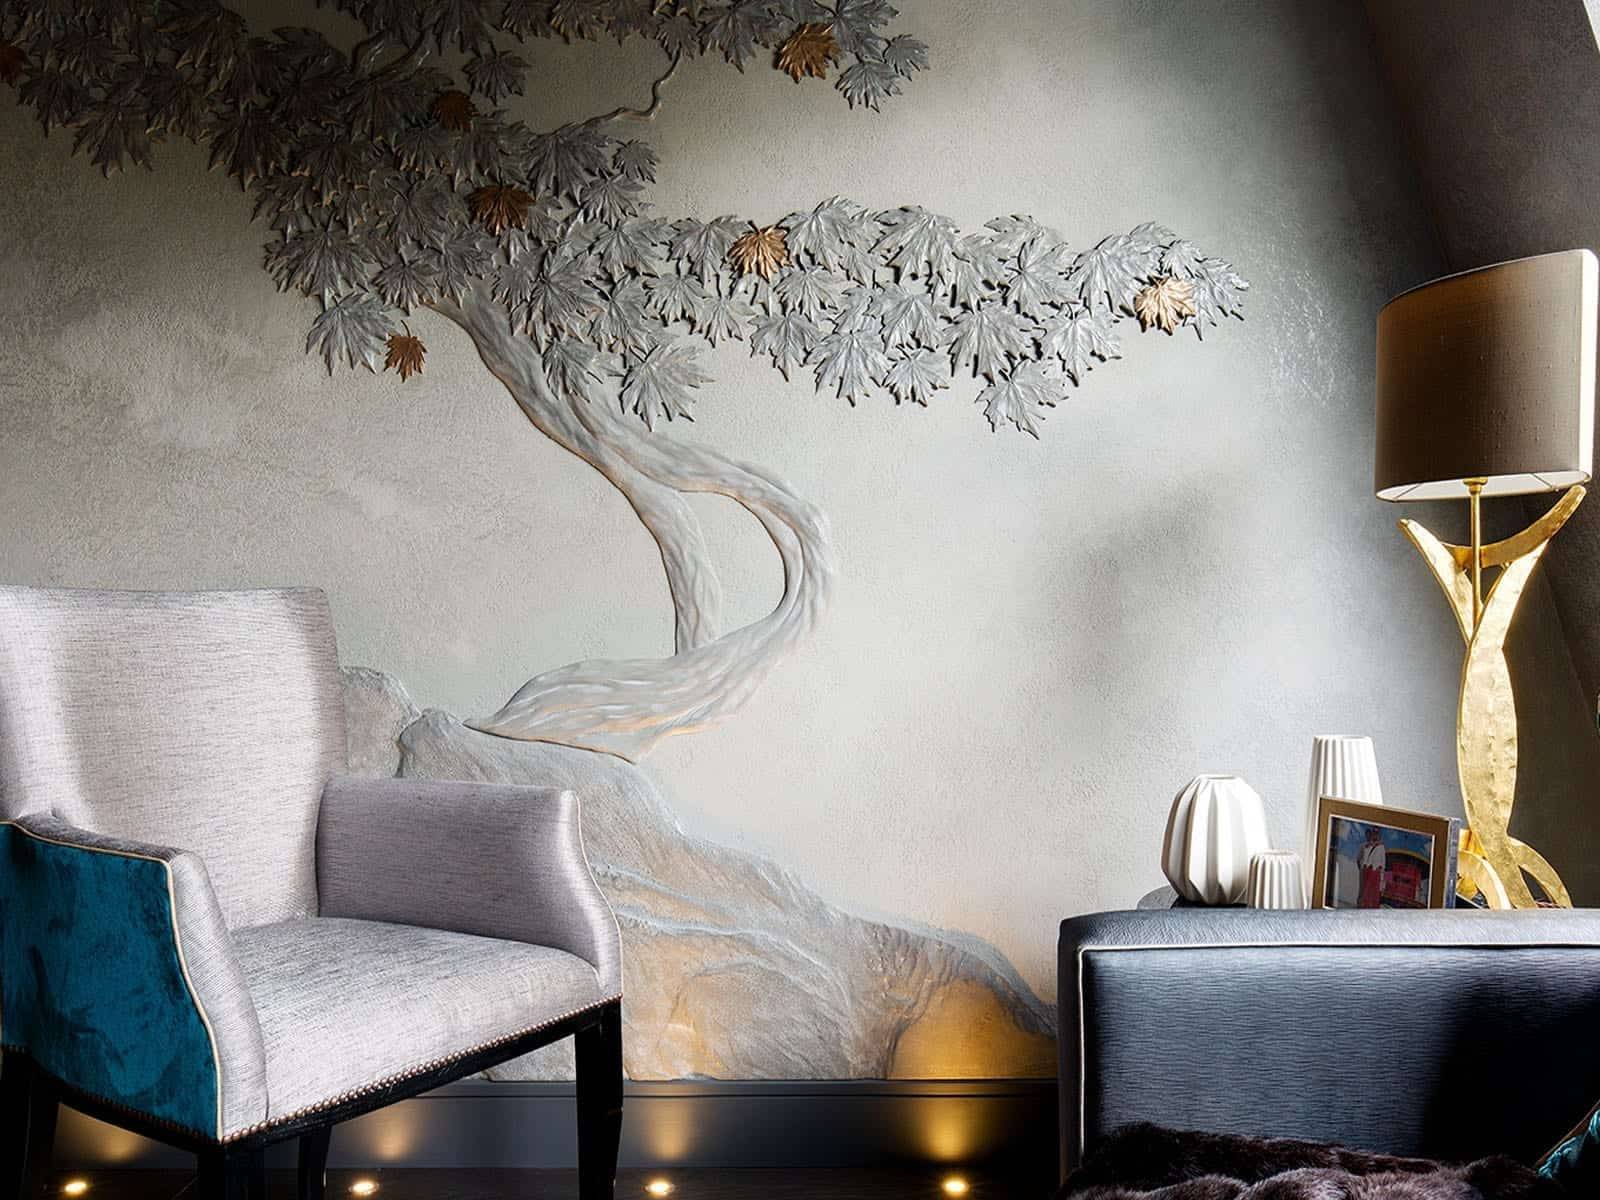 Maple tree bas-relief finished in stucco and metal leaf, private apartment, London. | DESIGN: Rene Dekker | PHOTO: © Rene Dekker